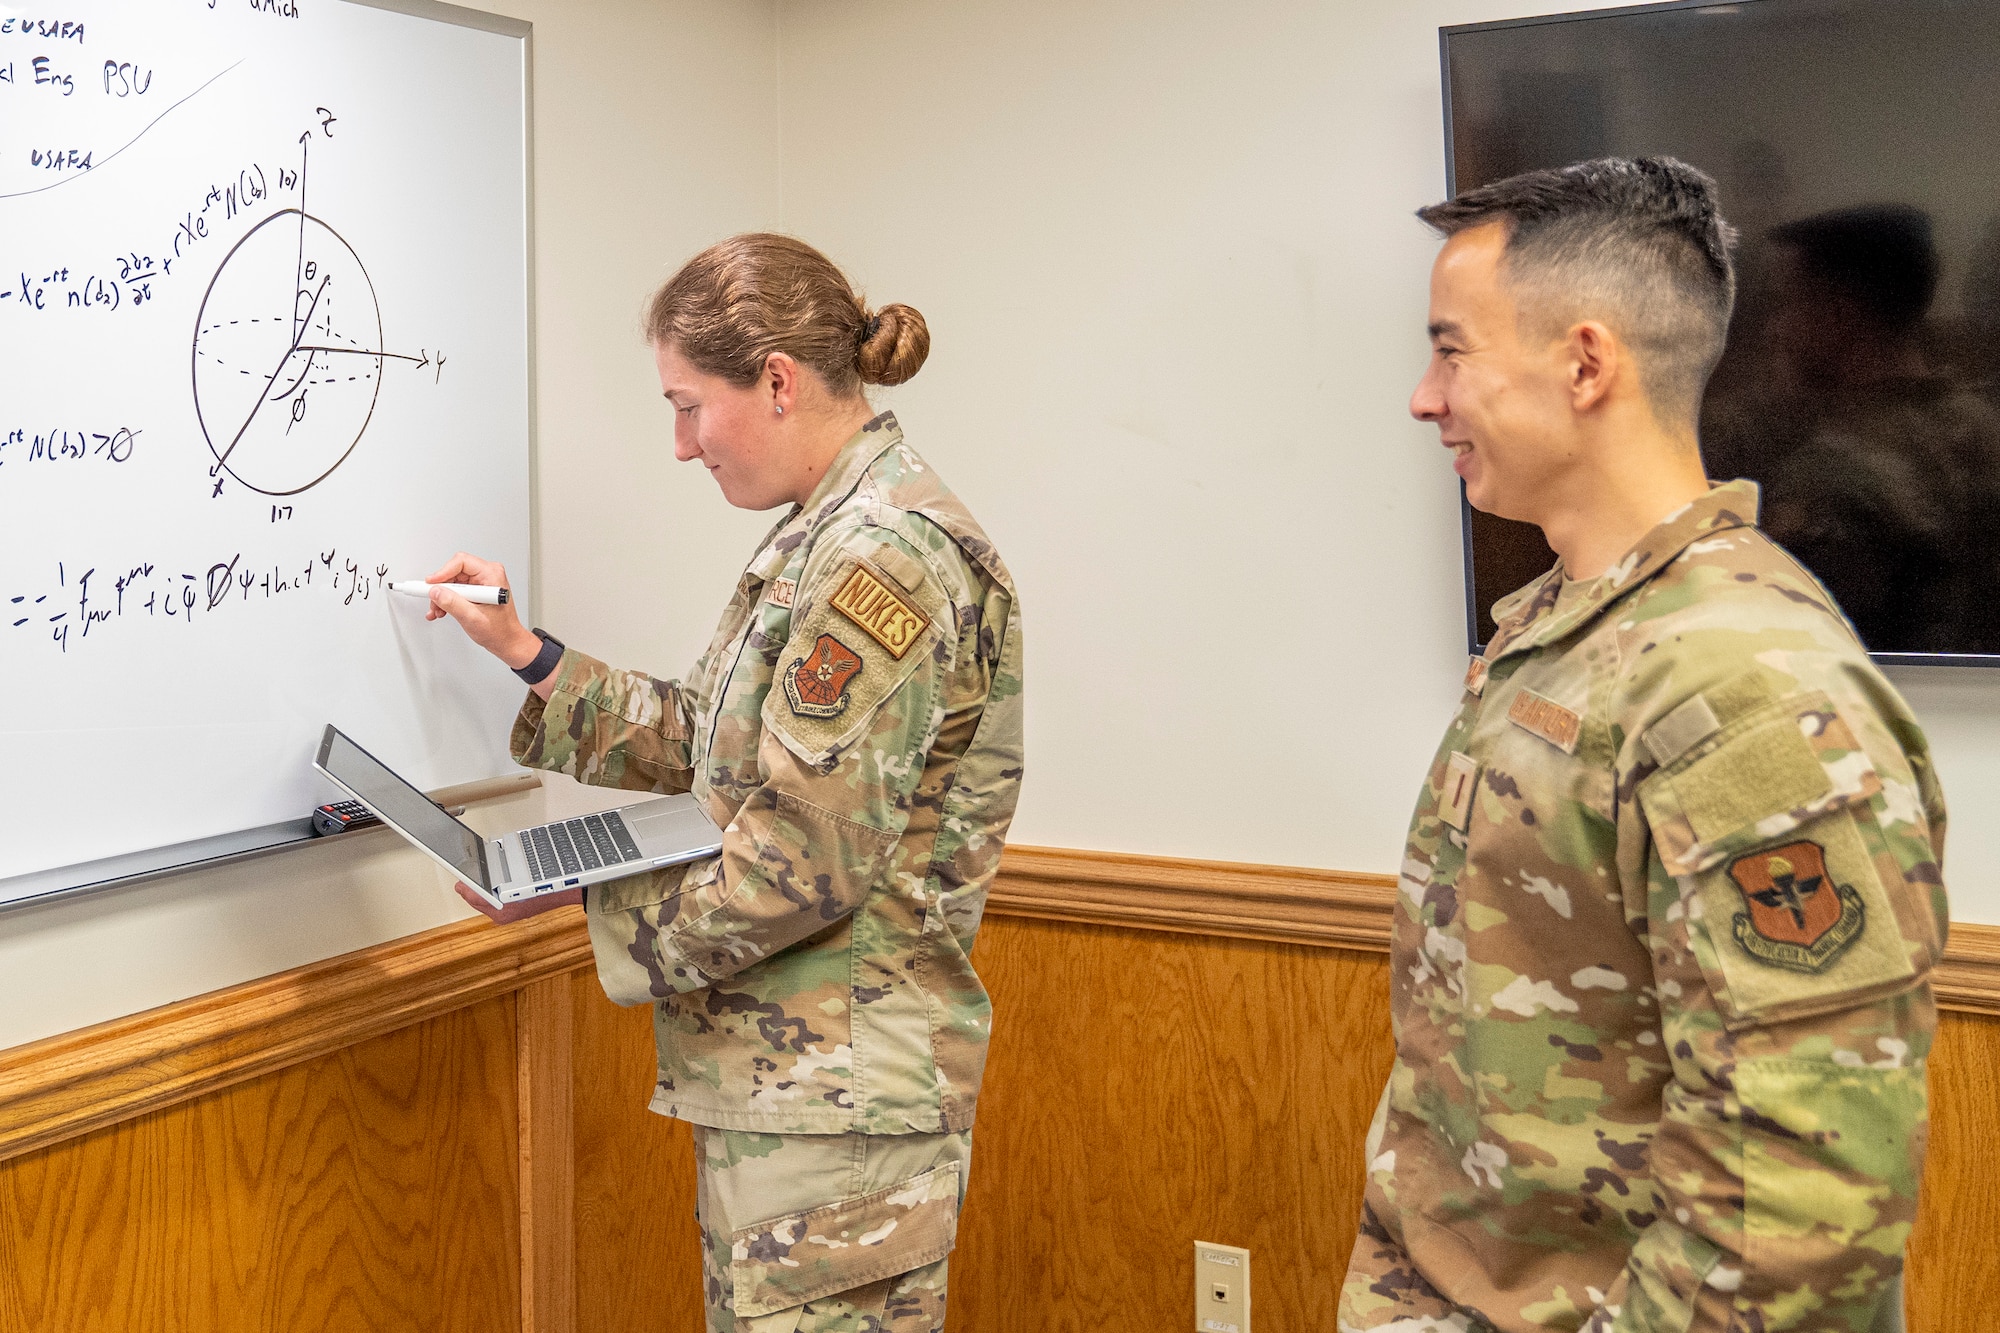 U.S. Air Force 2nd Lts. Emelia McLaughlin and Sean Richard, 335th Training Squadron operation analysis students, work on finding the value of functions at Allee Hall at Keesler Air Force Base, Mississippi, Oct. 10, 2023.